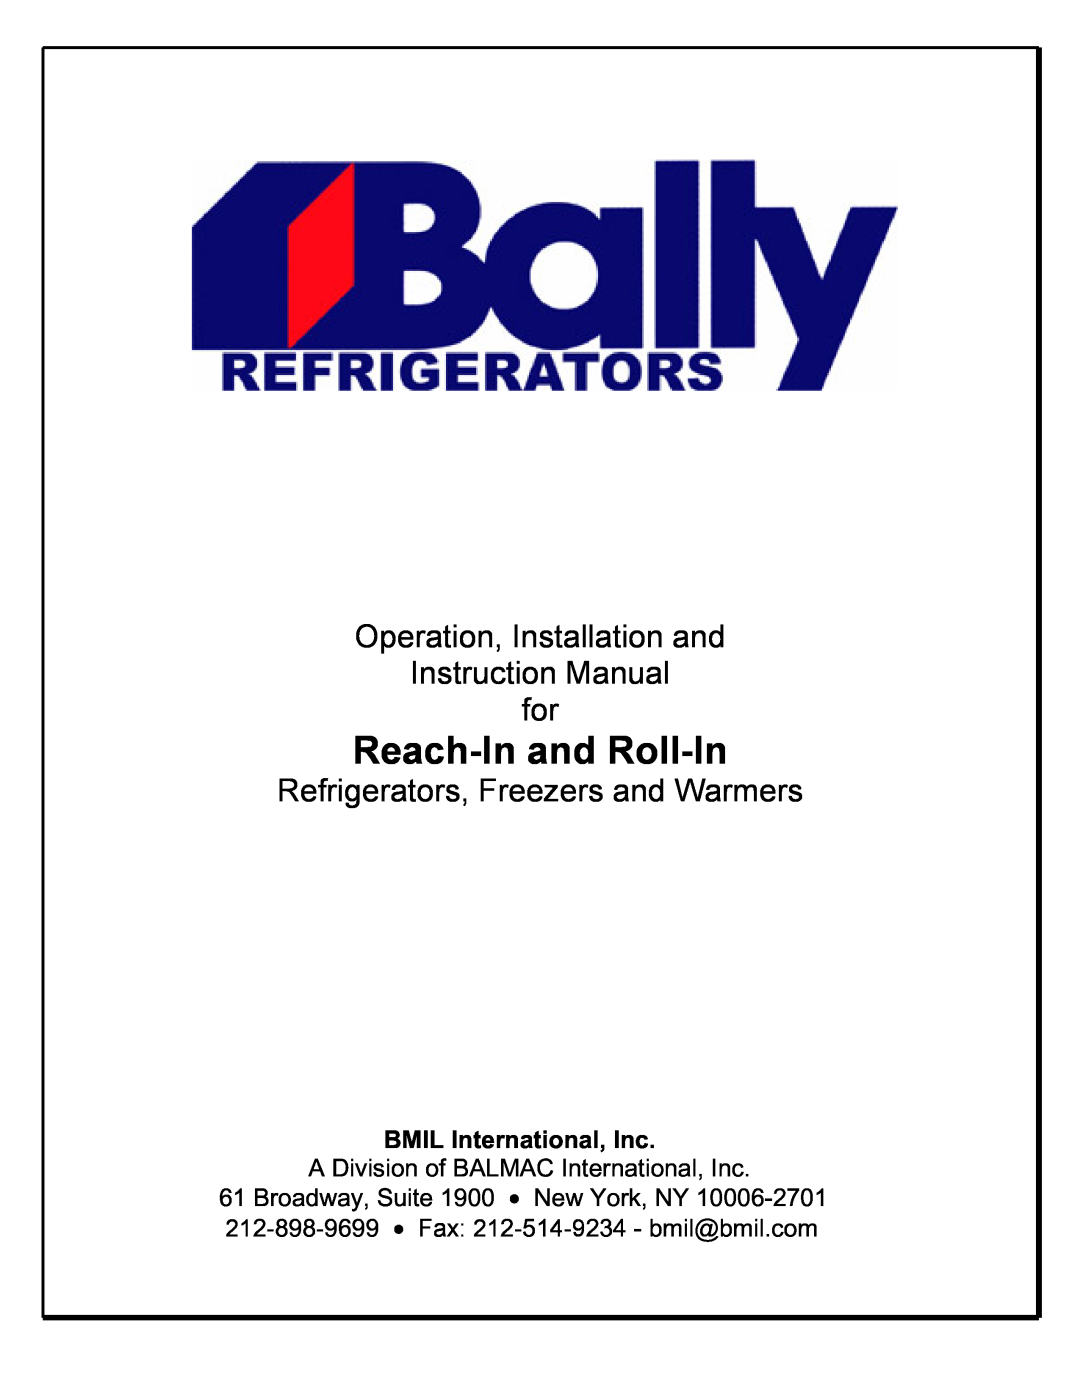 Bally Refrigerated Boxes Refrigerators/Freezers/Warmers manual BMIL International, Inc, Reach-In and Roll-In 